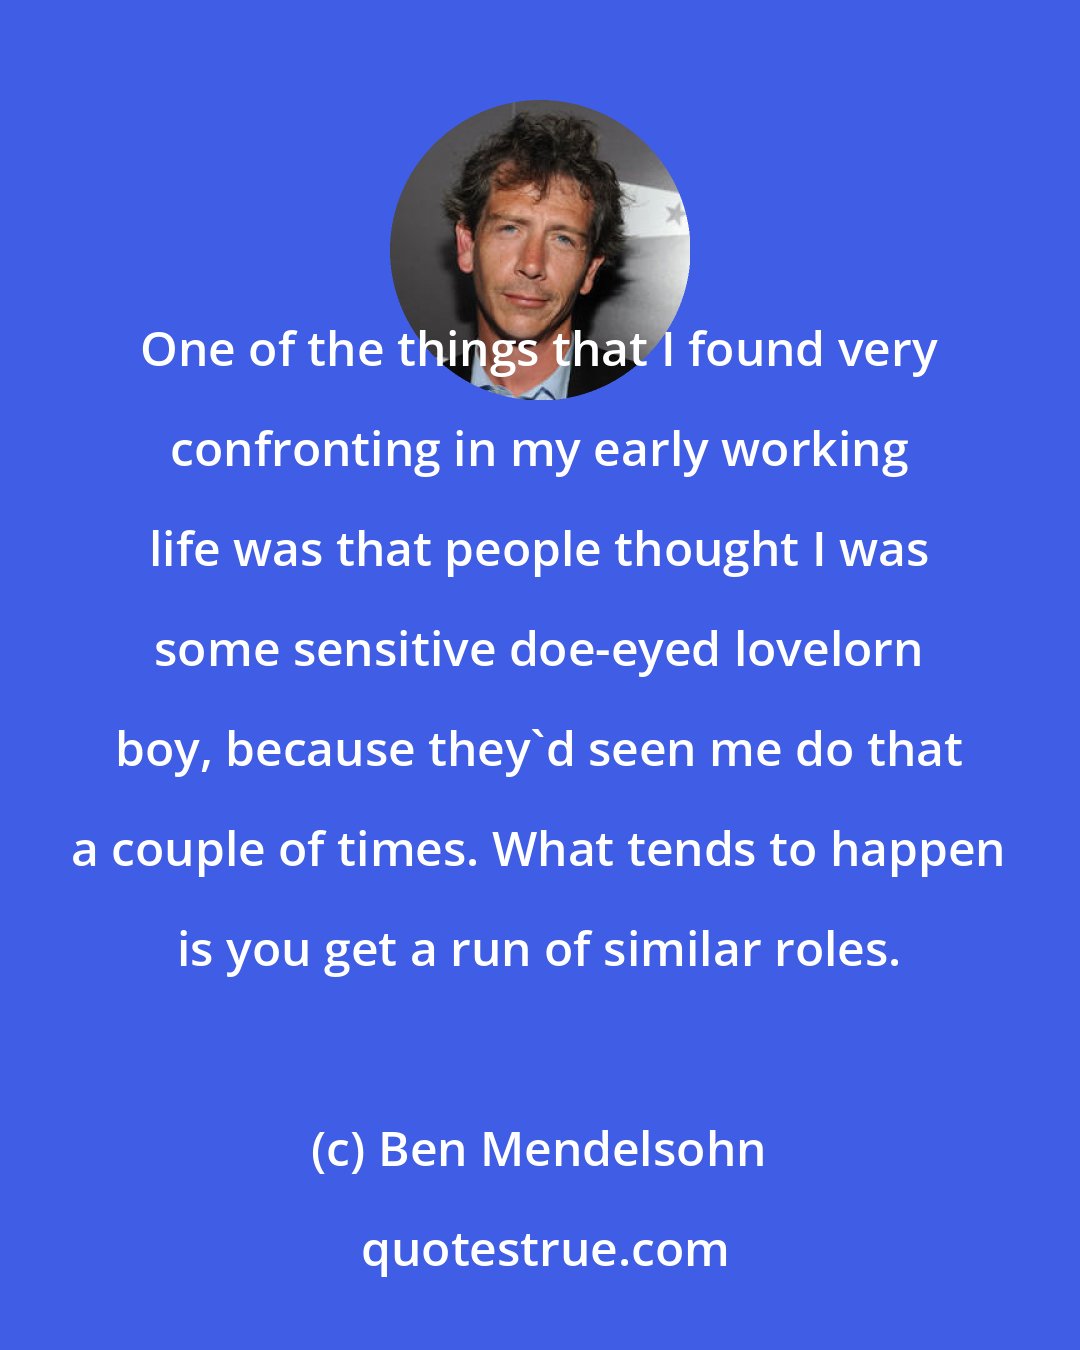 Ben Mendelsohn: One of the things that I found very confronting in my early working life was that people thought I was some sensitive doe-eyed lovelorn boy, because they'd seen me do that a couple of times. What tends to happen is you get a run of similar roles.